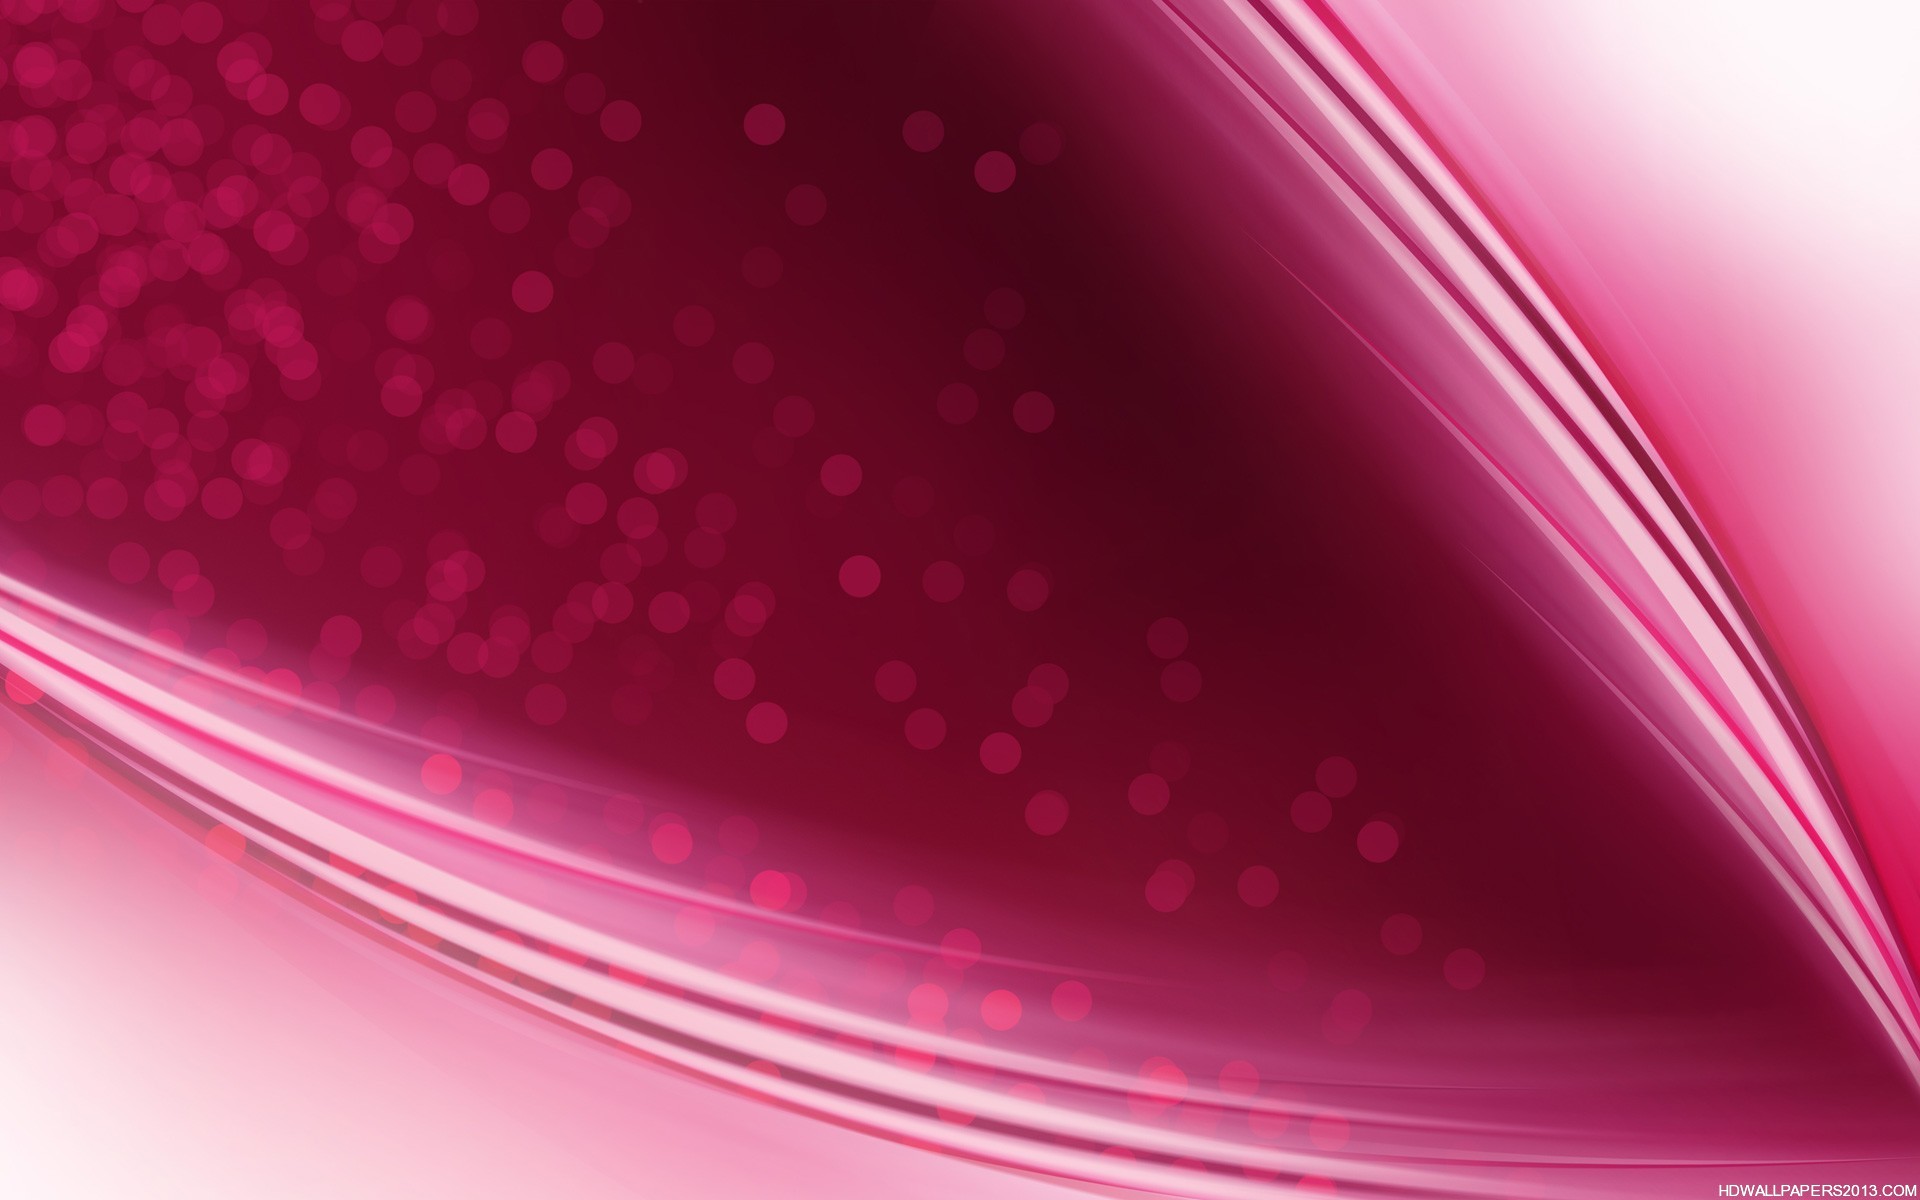 10 Greatest High Resolution Pink Desktop Wallpaper You Can Save It Free Of Charge Aesthetic Arena